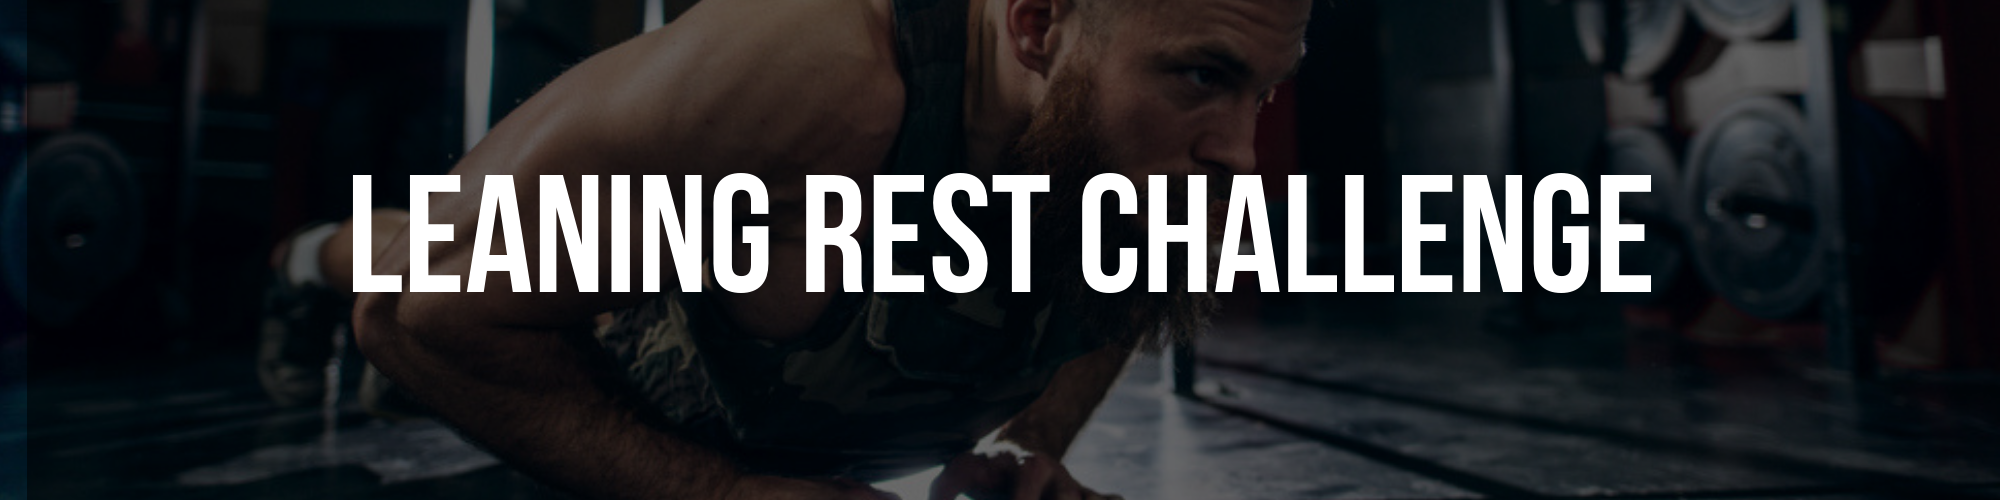 LEANING REST CHALLENGE